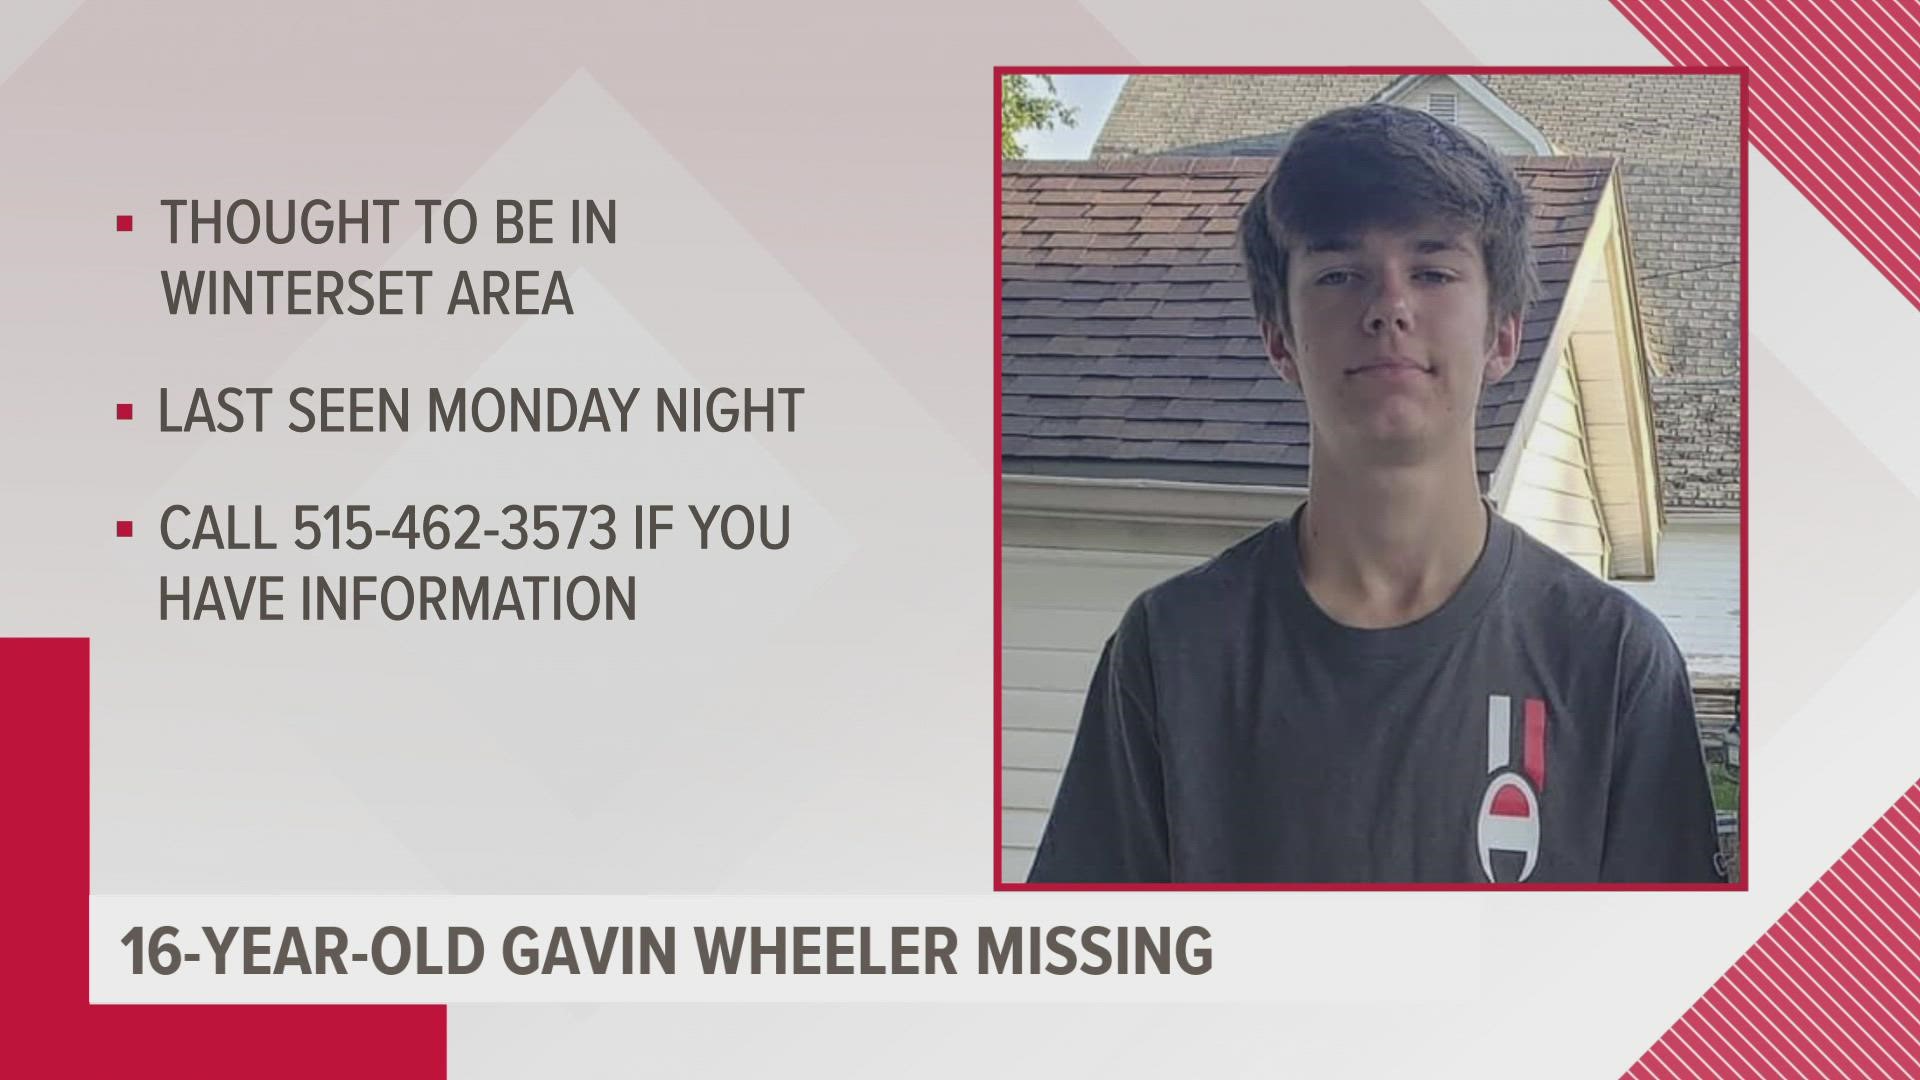 16-year-old Gavin Wheeler is thought to be in the Winterset area.